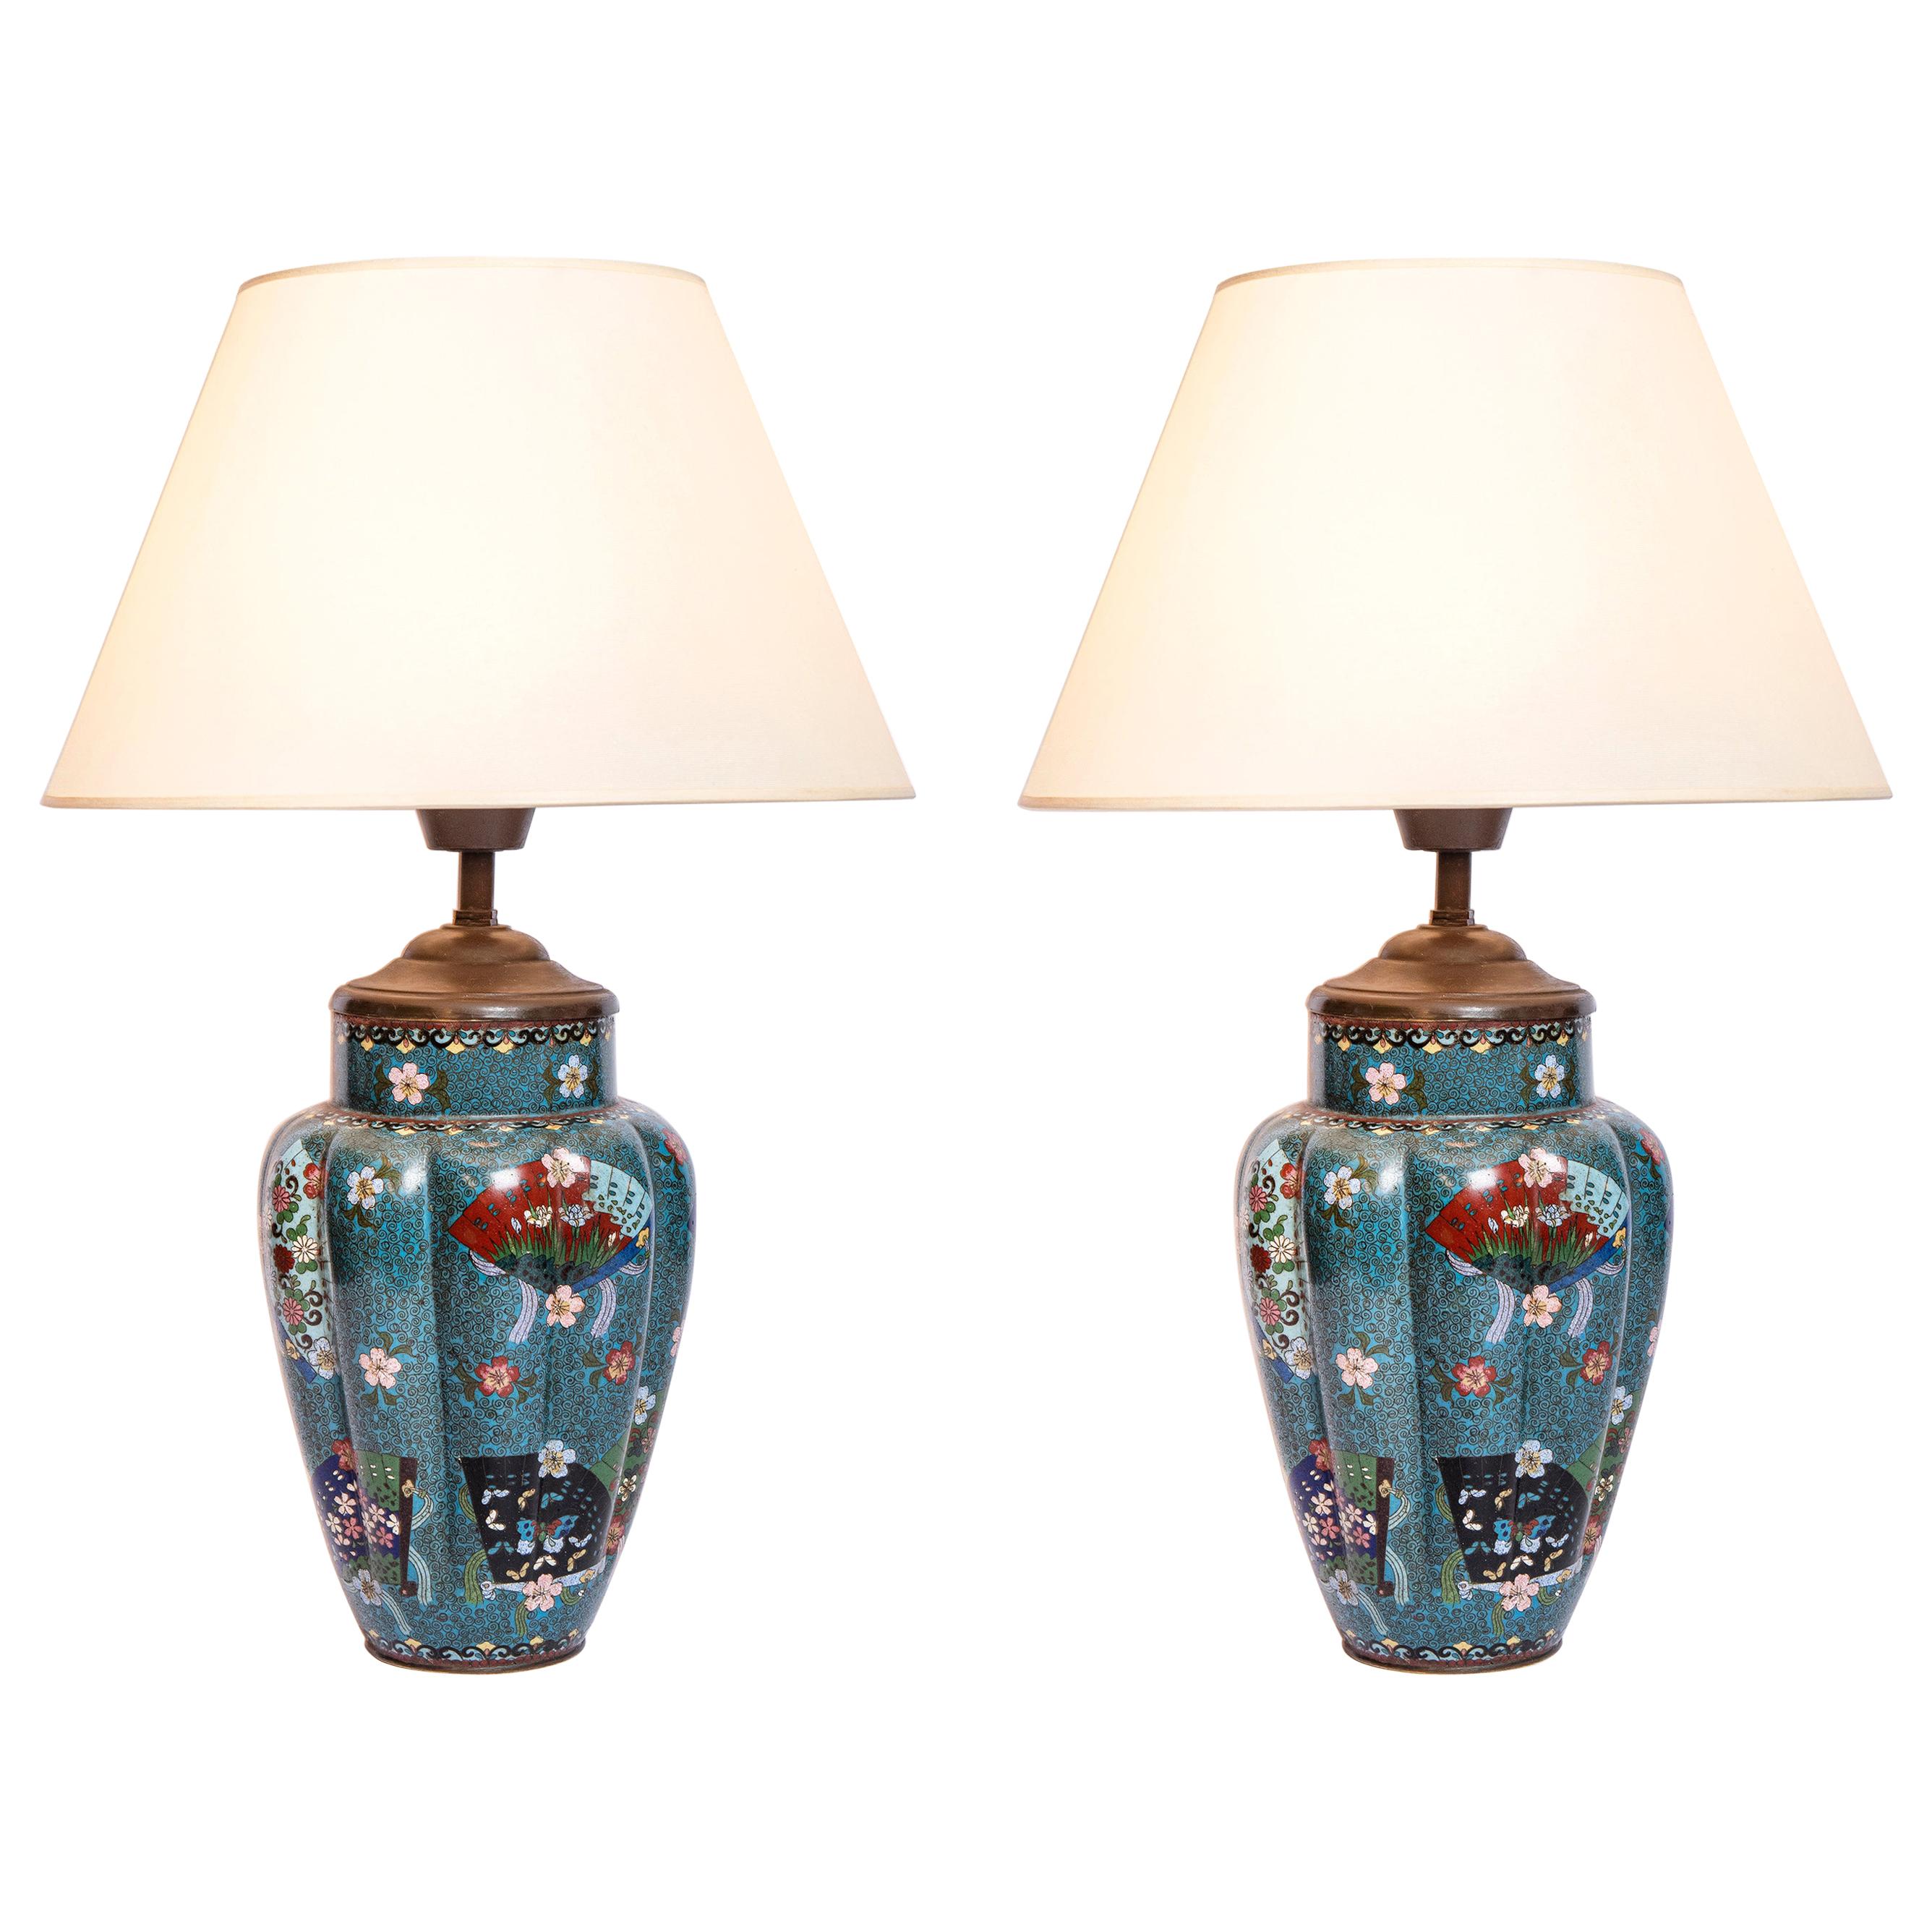 Pair of Cloisonné Table Lamps. Japan, Late 19th Century